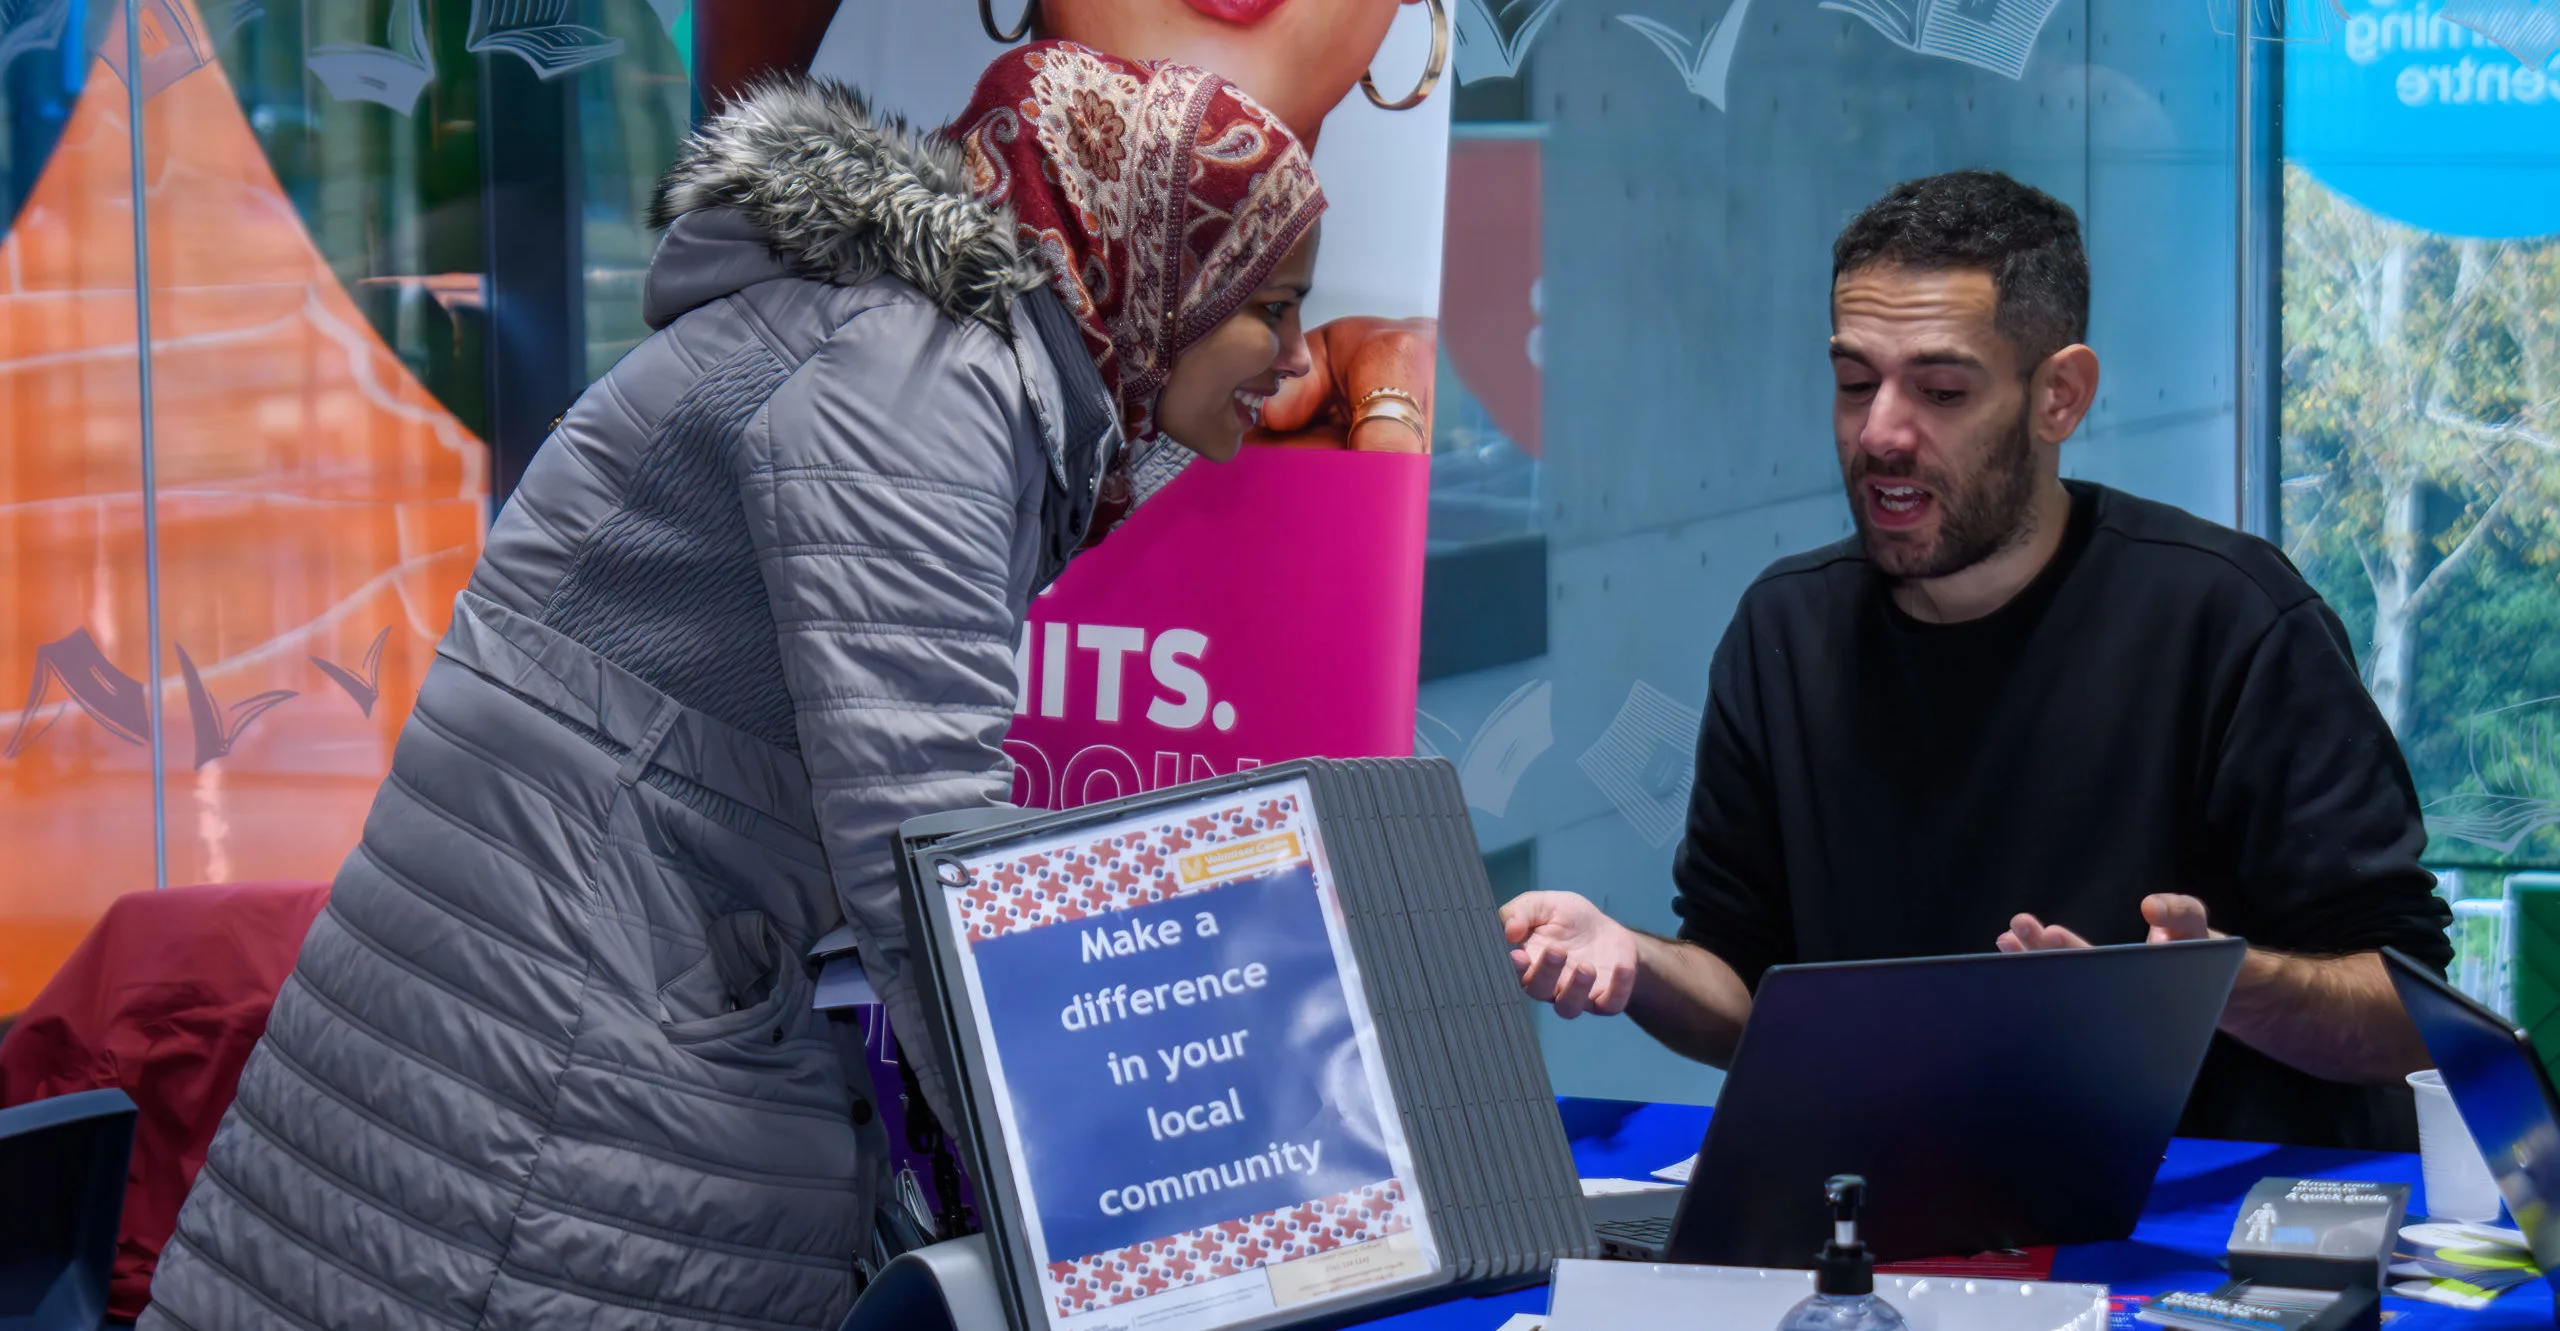 A woman wearing a headscarf leans in smiling towards a laptop next to a man in a black jumper